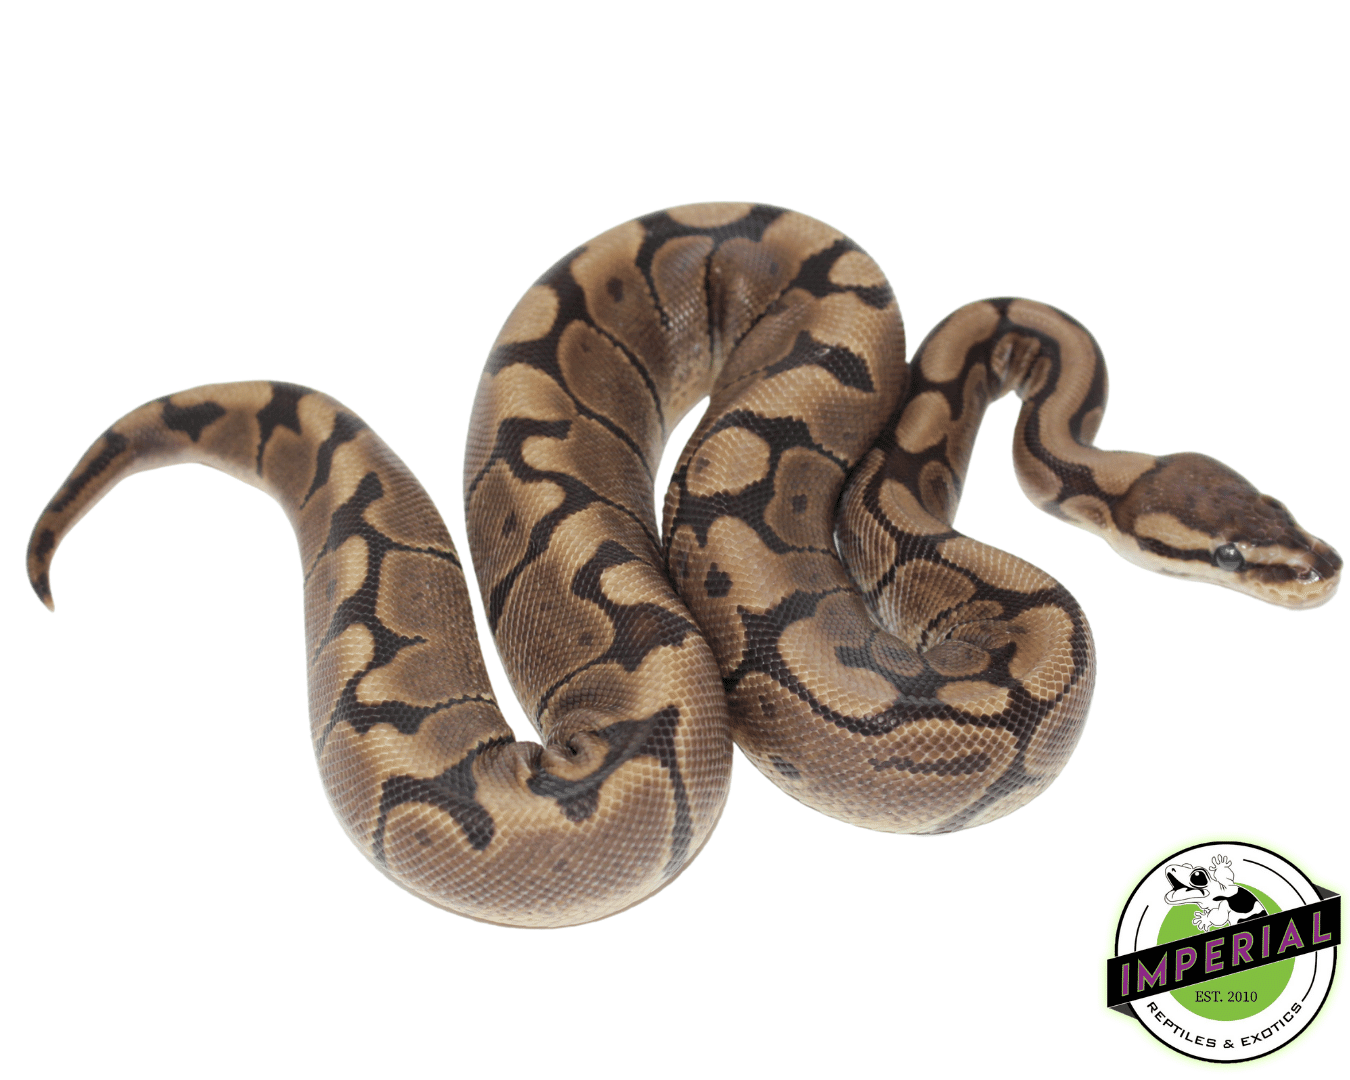 woma ball python for sale, buy reptiles online